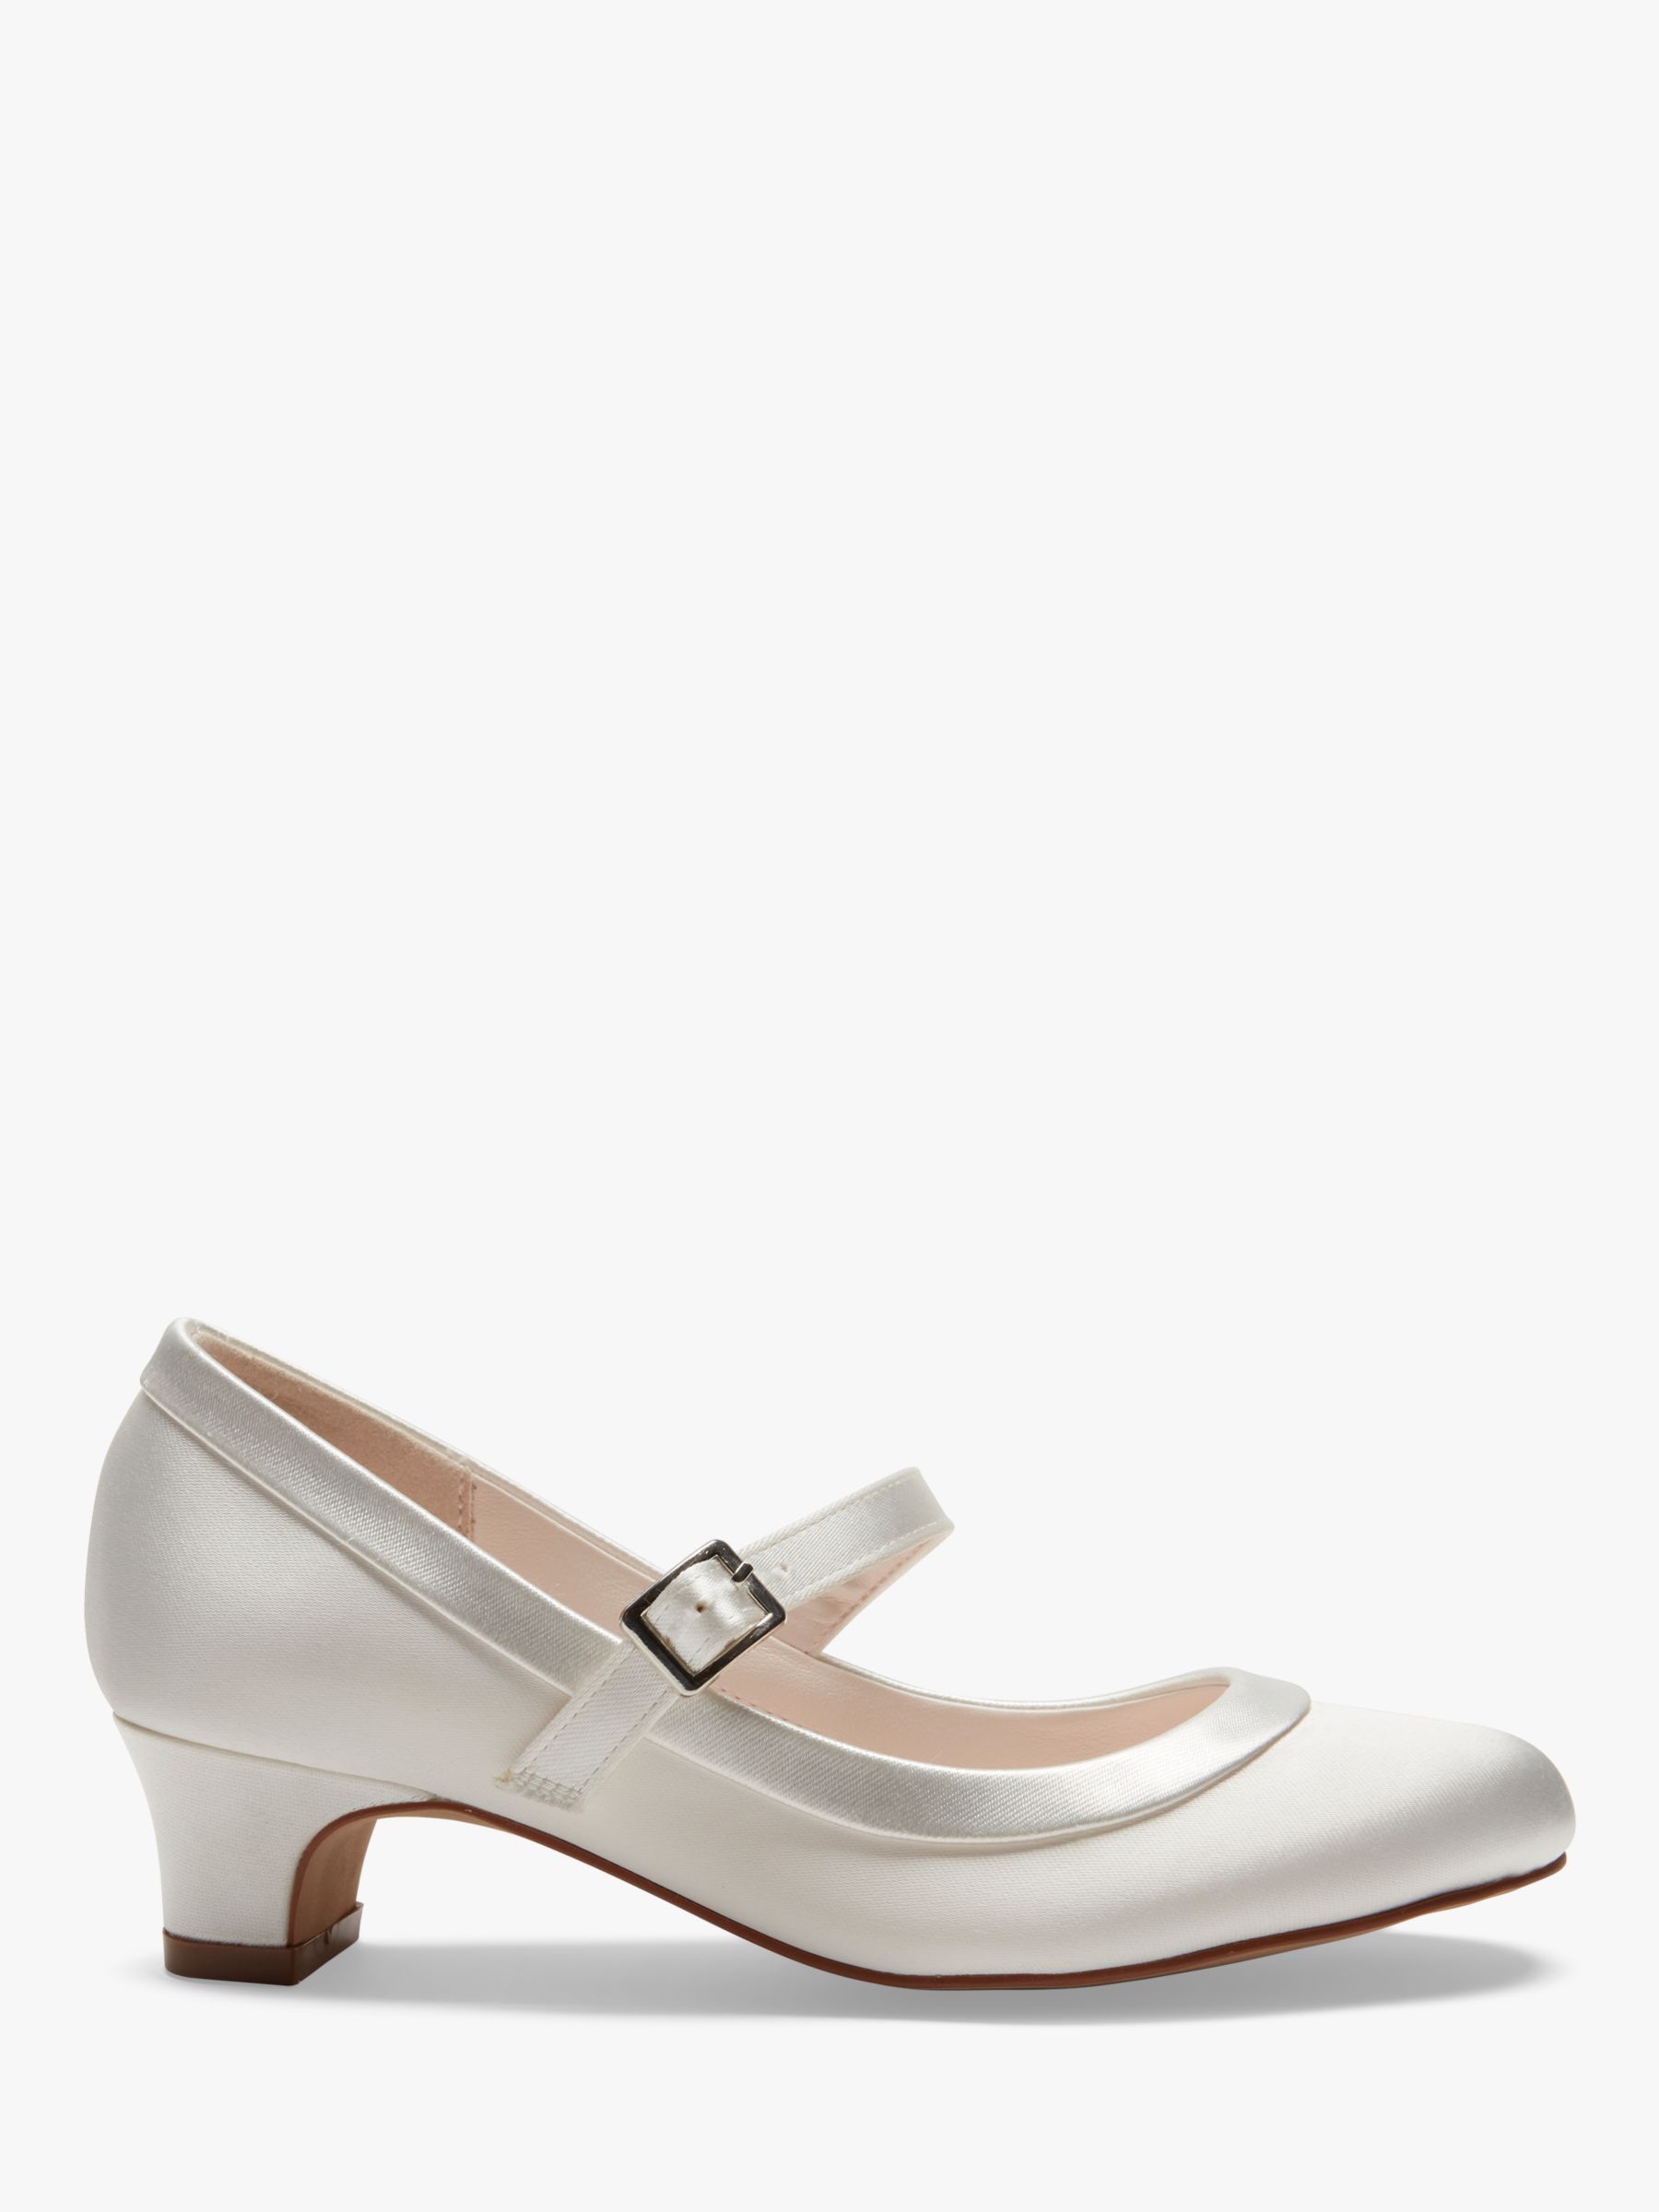 Rainbow Club Maisie Bridesmaids' Shoes, Ivory at John Lewis & Partners